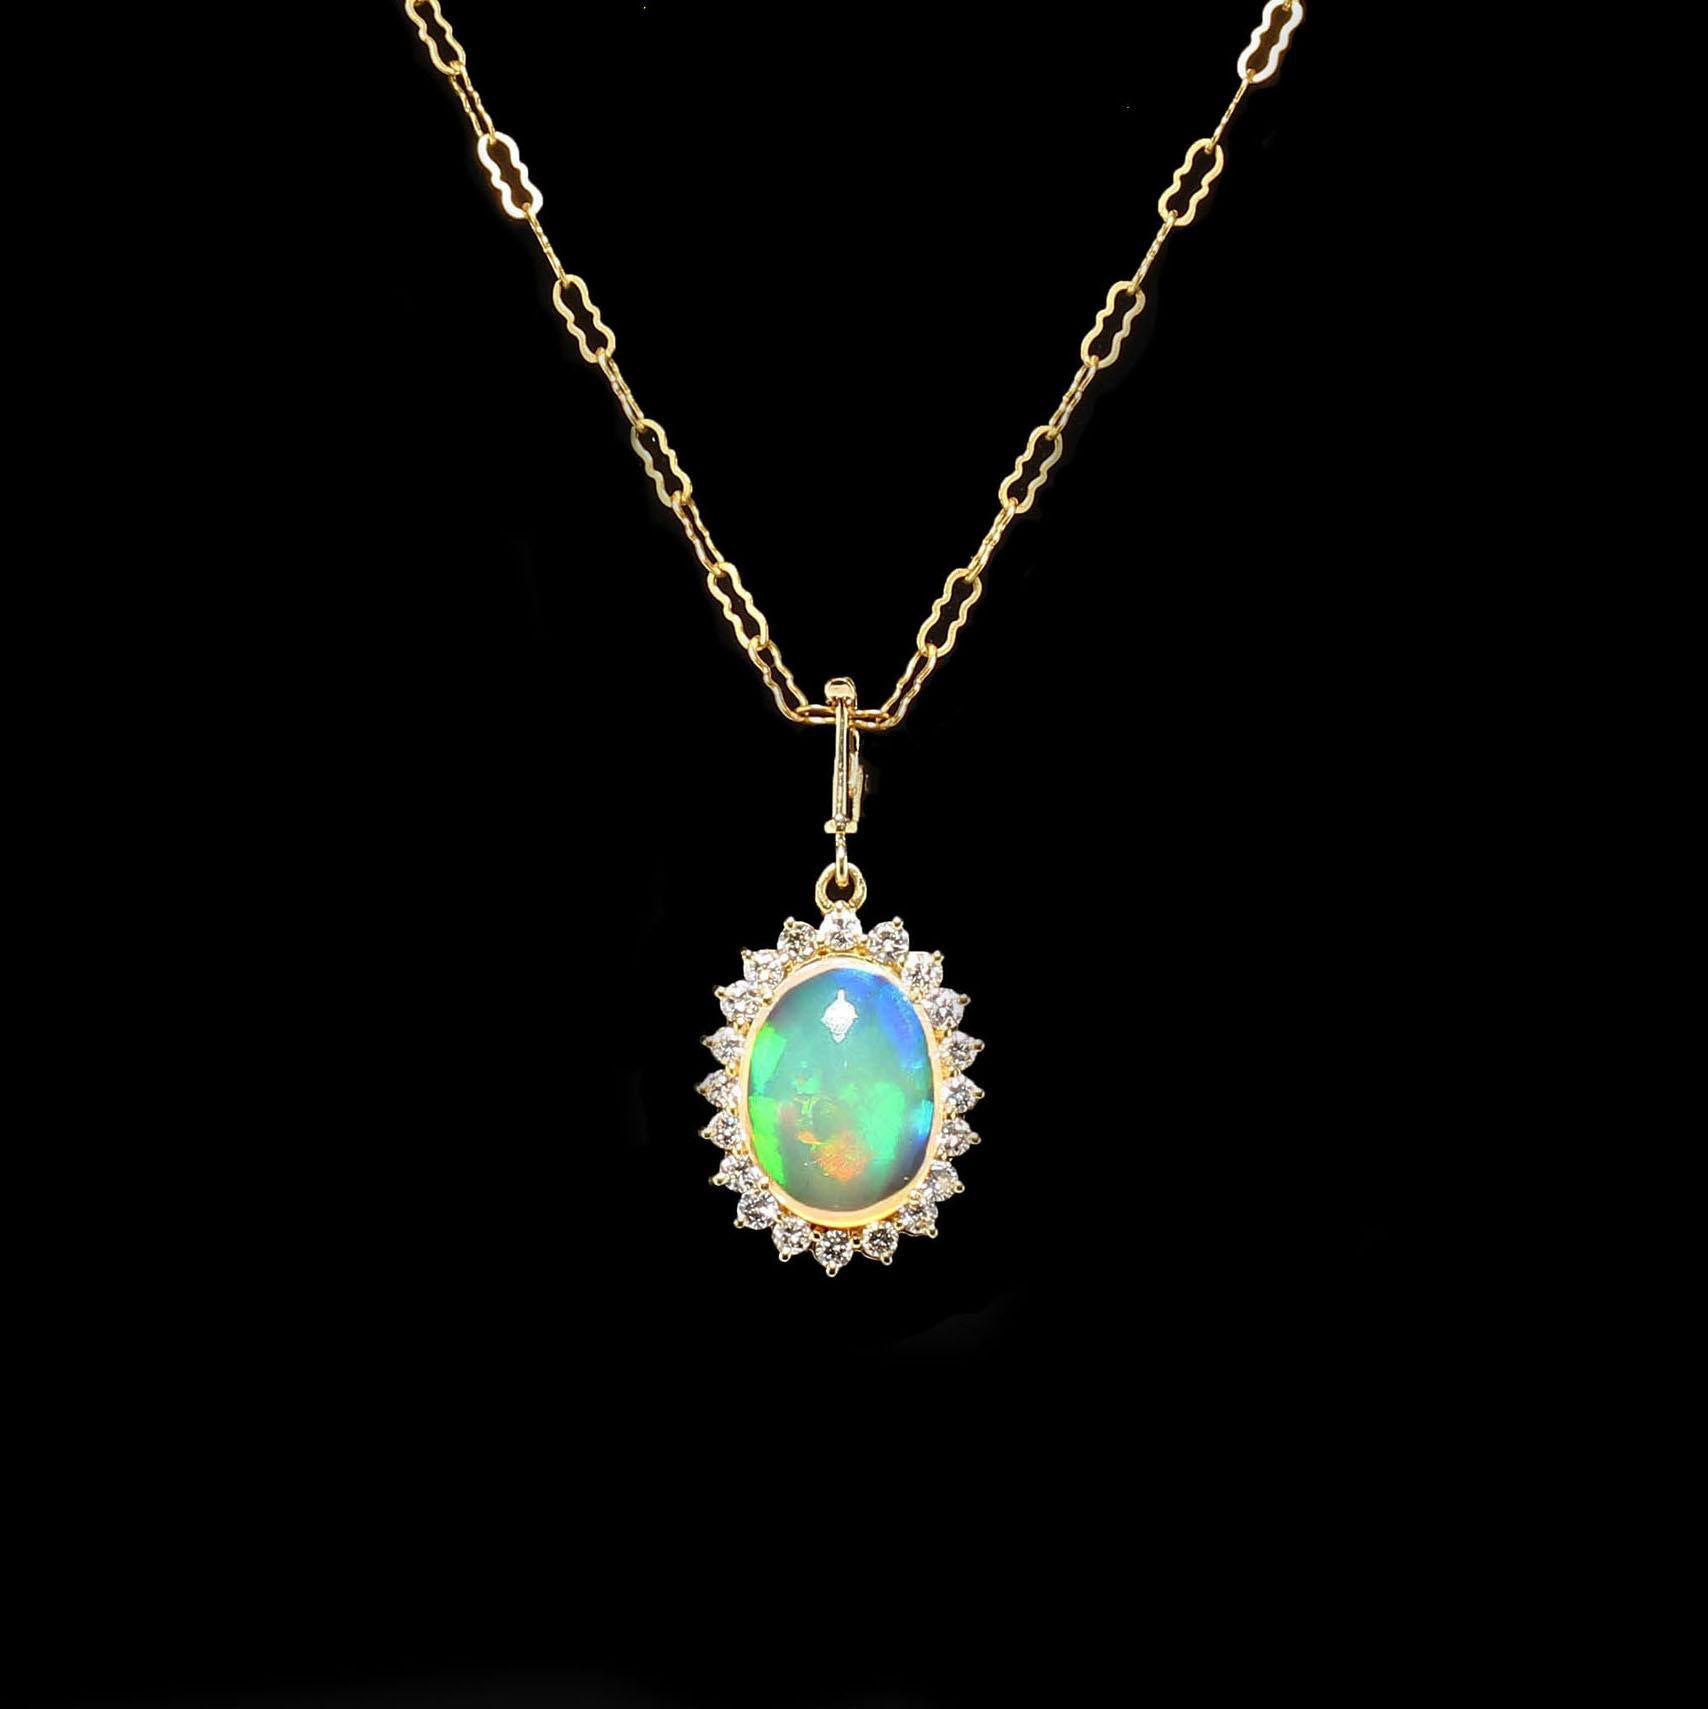 Gorgeous Opal and Diamond pendant with firely orange, green, and blue flashes.  This unique hand made pendant features a cabachon Opal (15 X 11 MM) surrounded by 20 Diamonds of approximately 0.65 ctw, G/H/I color, VS2-SI1 clarity.  It is 1.25 inches